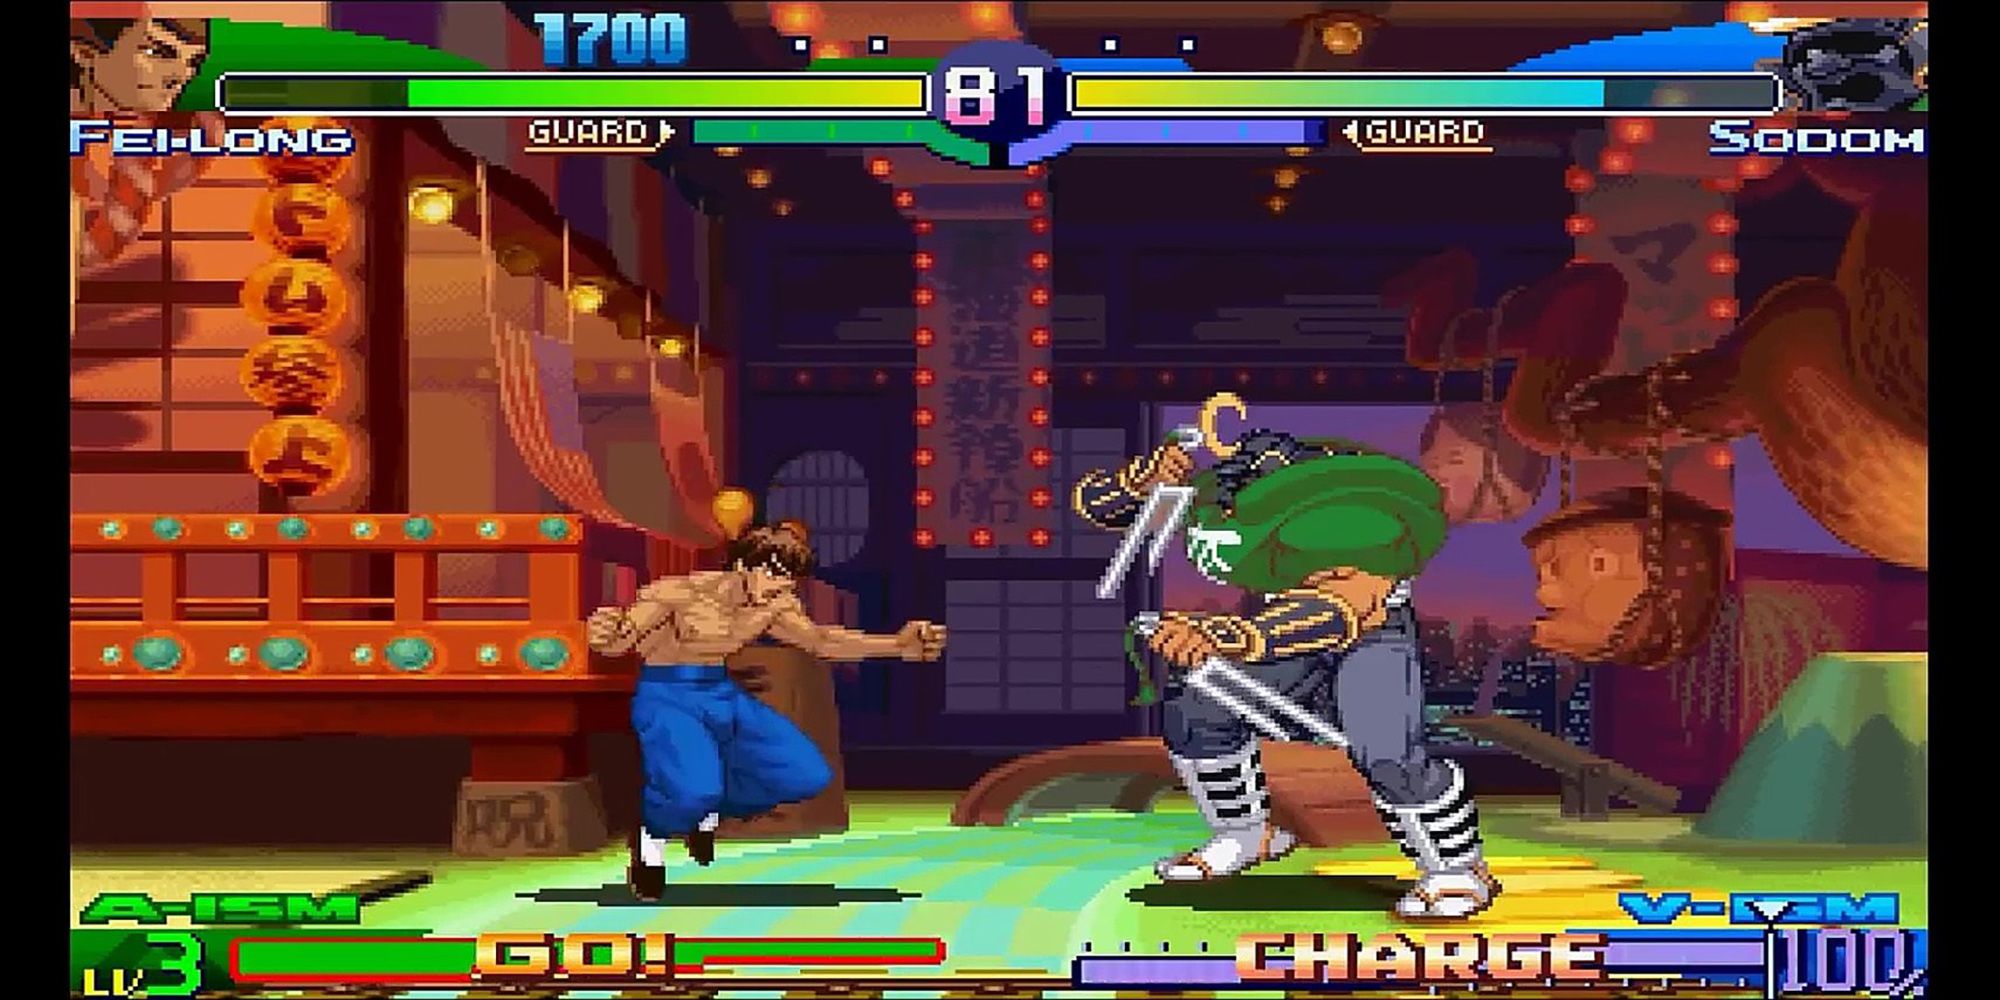 Fei Long faces off against Sodom in Street Fighter Alpha 3.